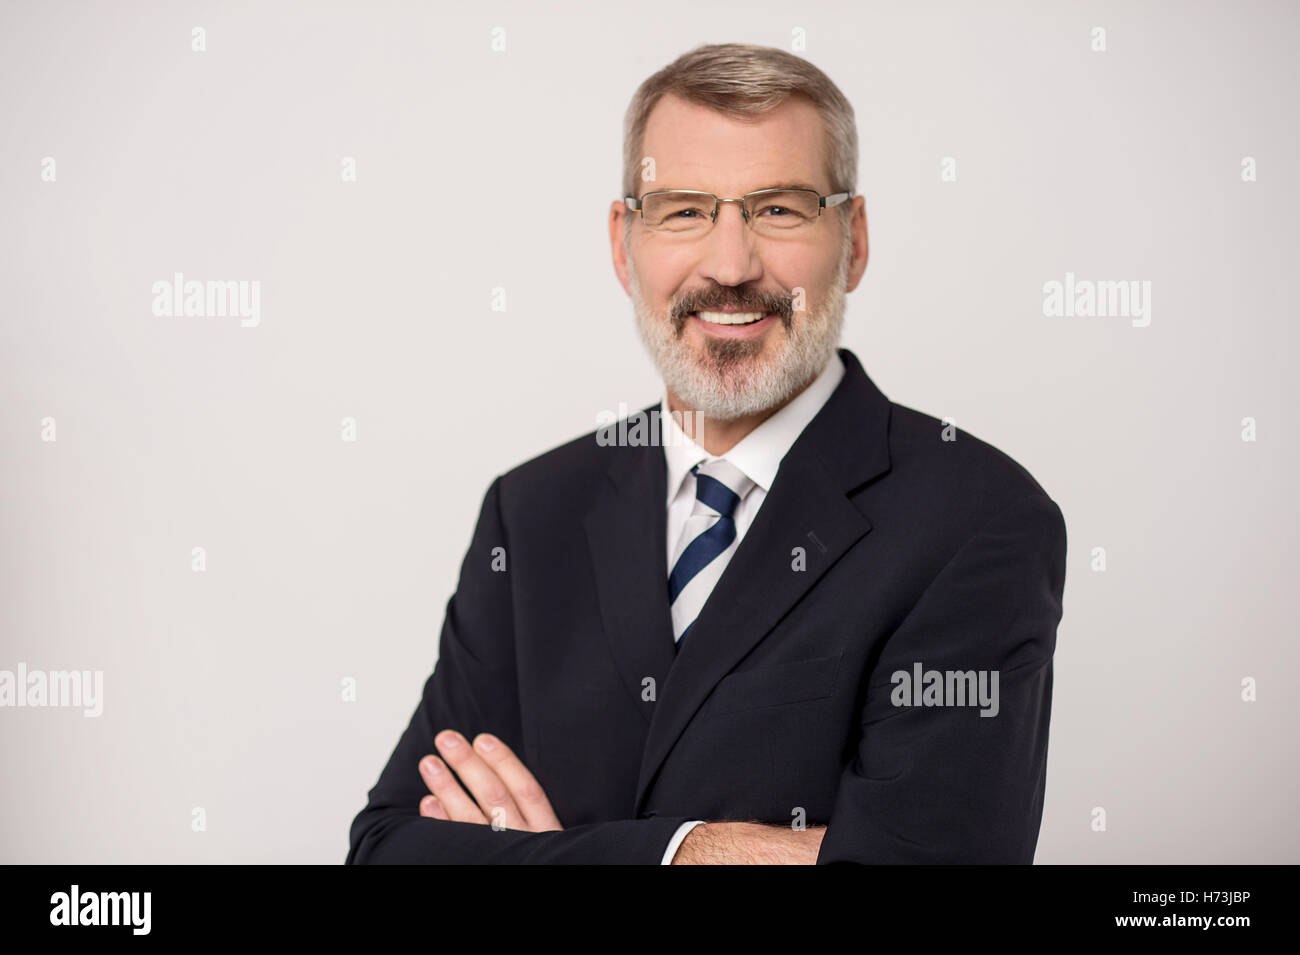 laugh laughs laughing twit giggle smile smiling laughter laughingly smilingly smiles successful succesful isolated male Stock Photo